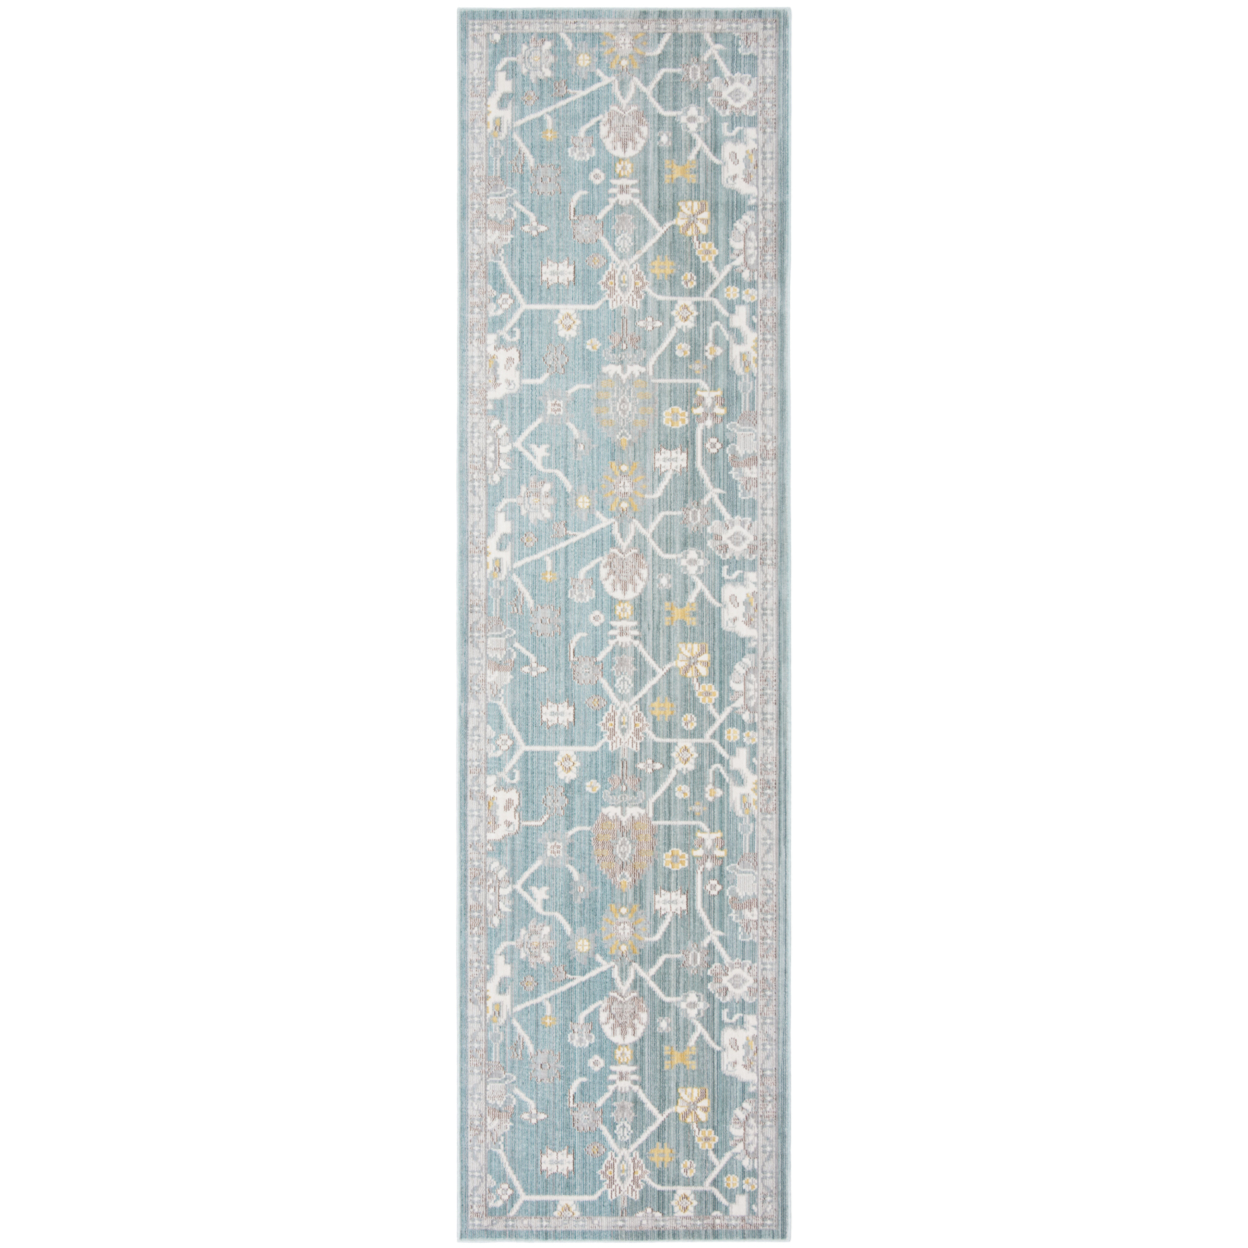 SAFAVIEH Valencia Collection VAL116S Steel Blue Rug - 6' X 9'